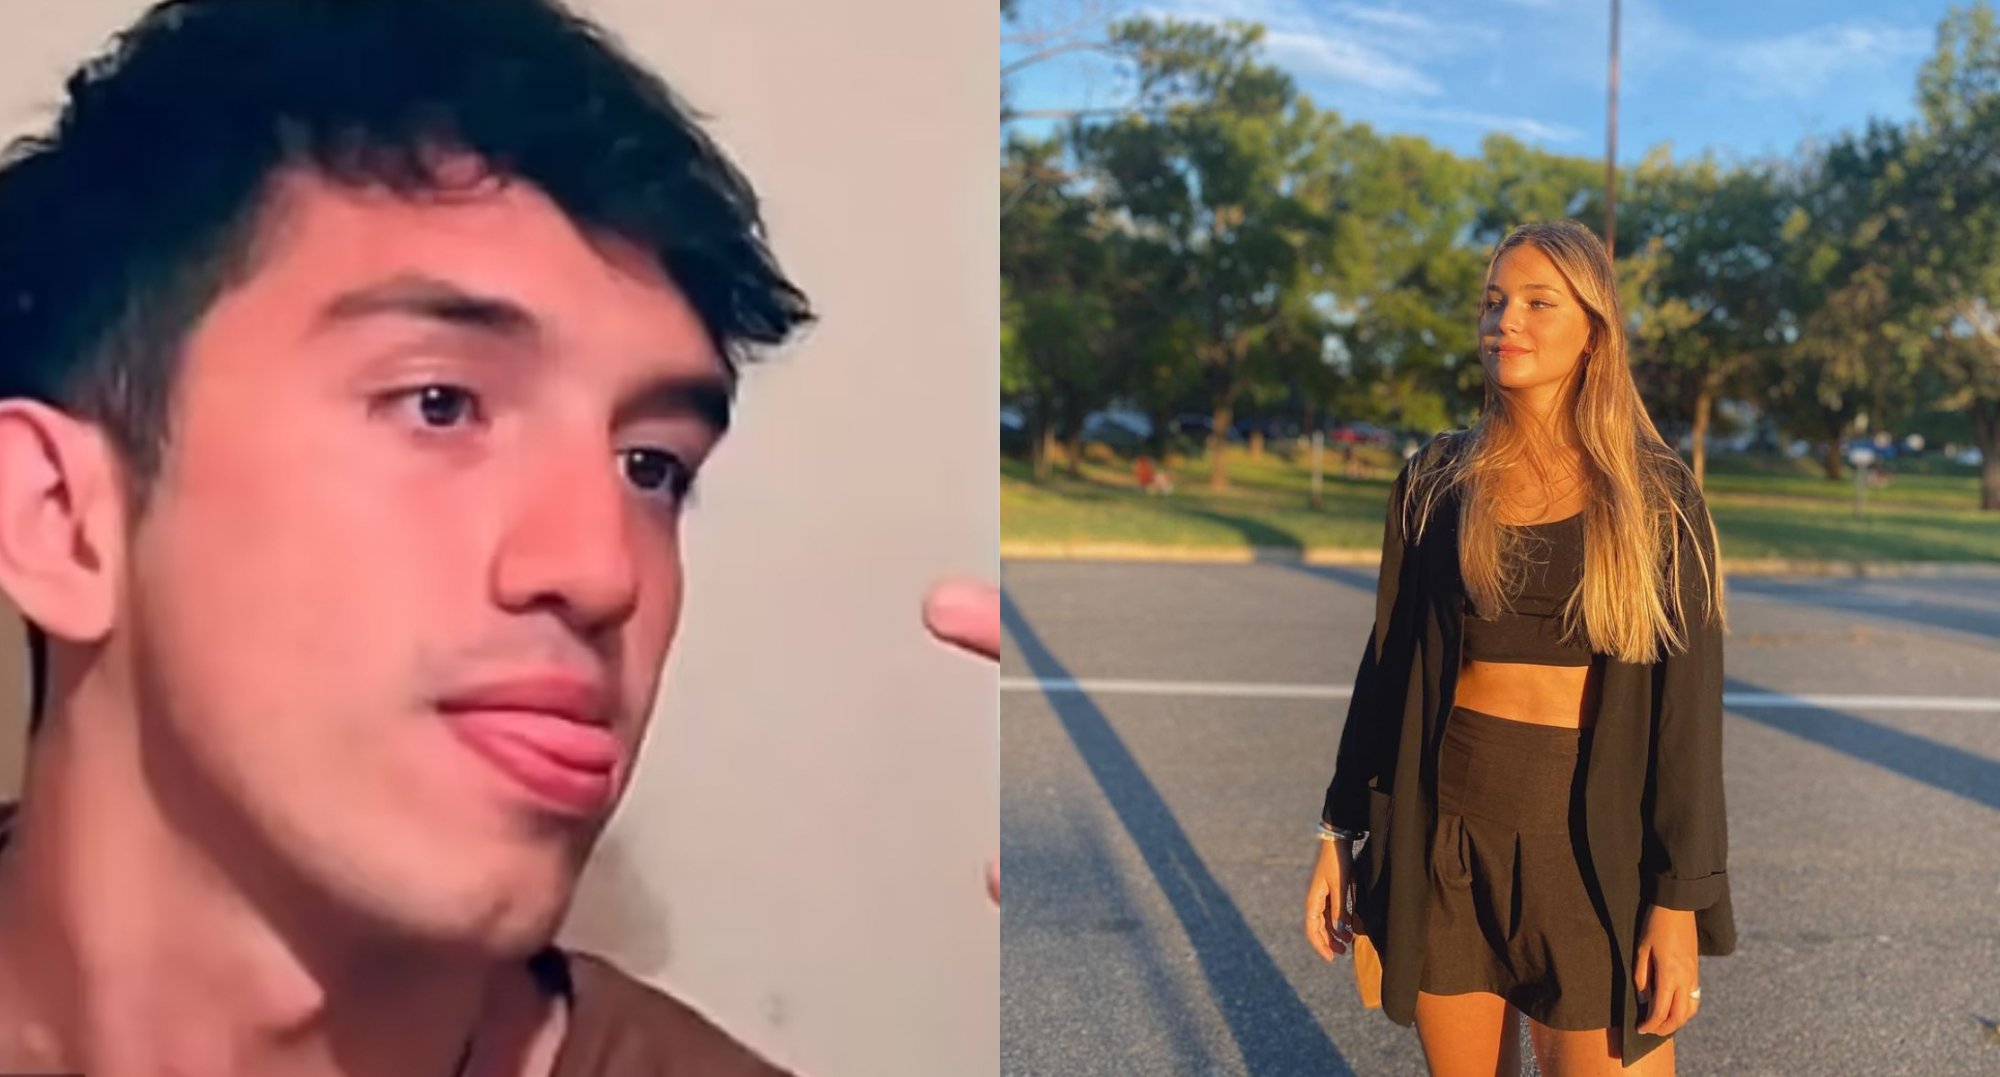 ‘Love of his life’ strangled and burned – tragic end for 21-year-old influencer